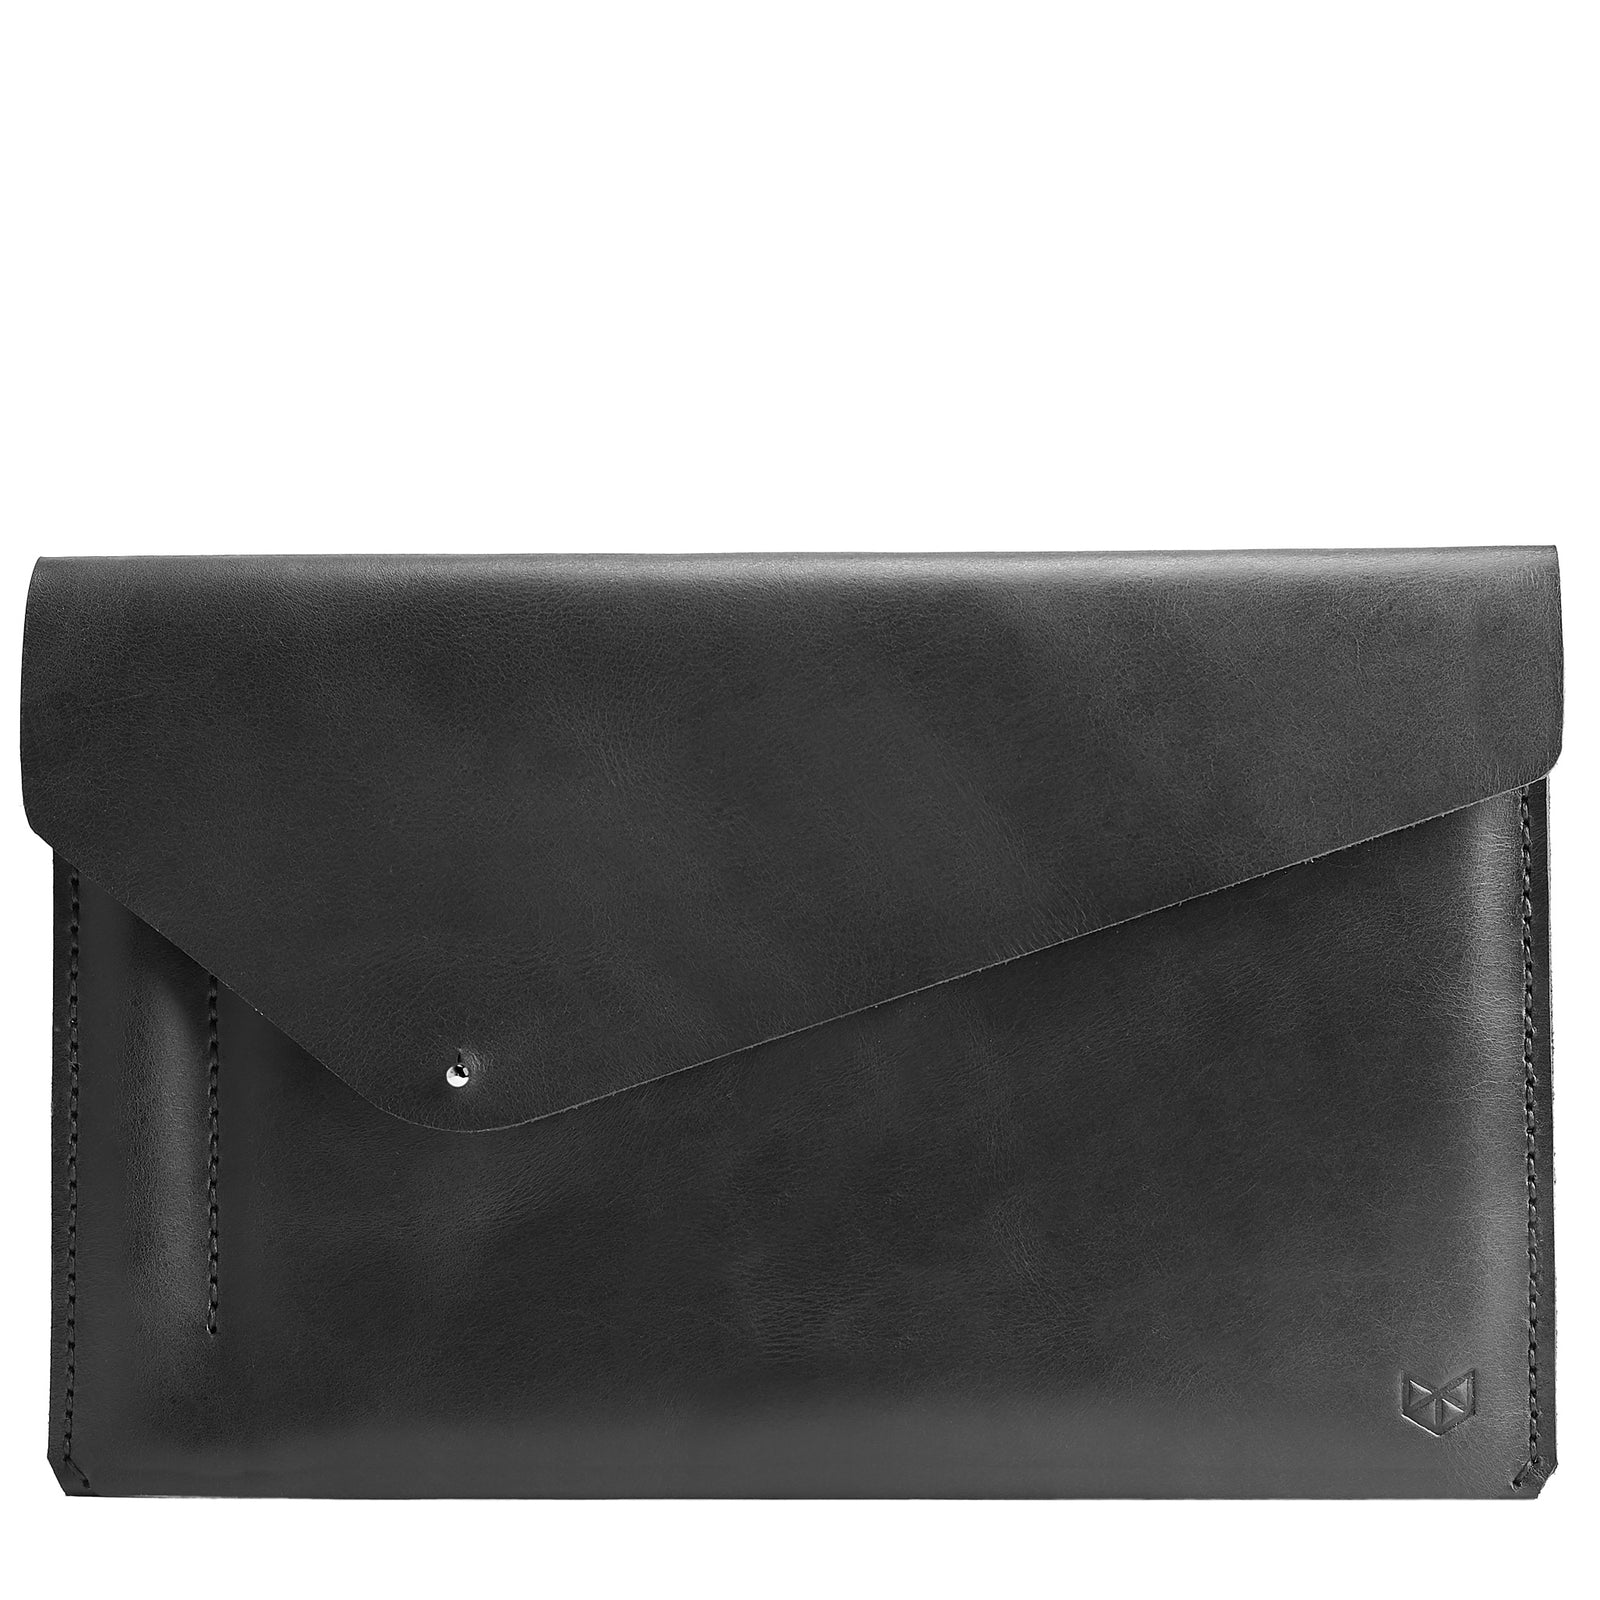 Cover. Black Leather reMarkable 1 Cover Case Sleeve With Marker Holder by Capra Leather